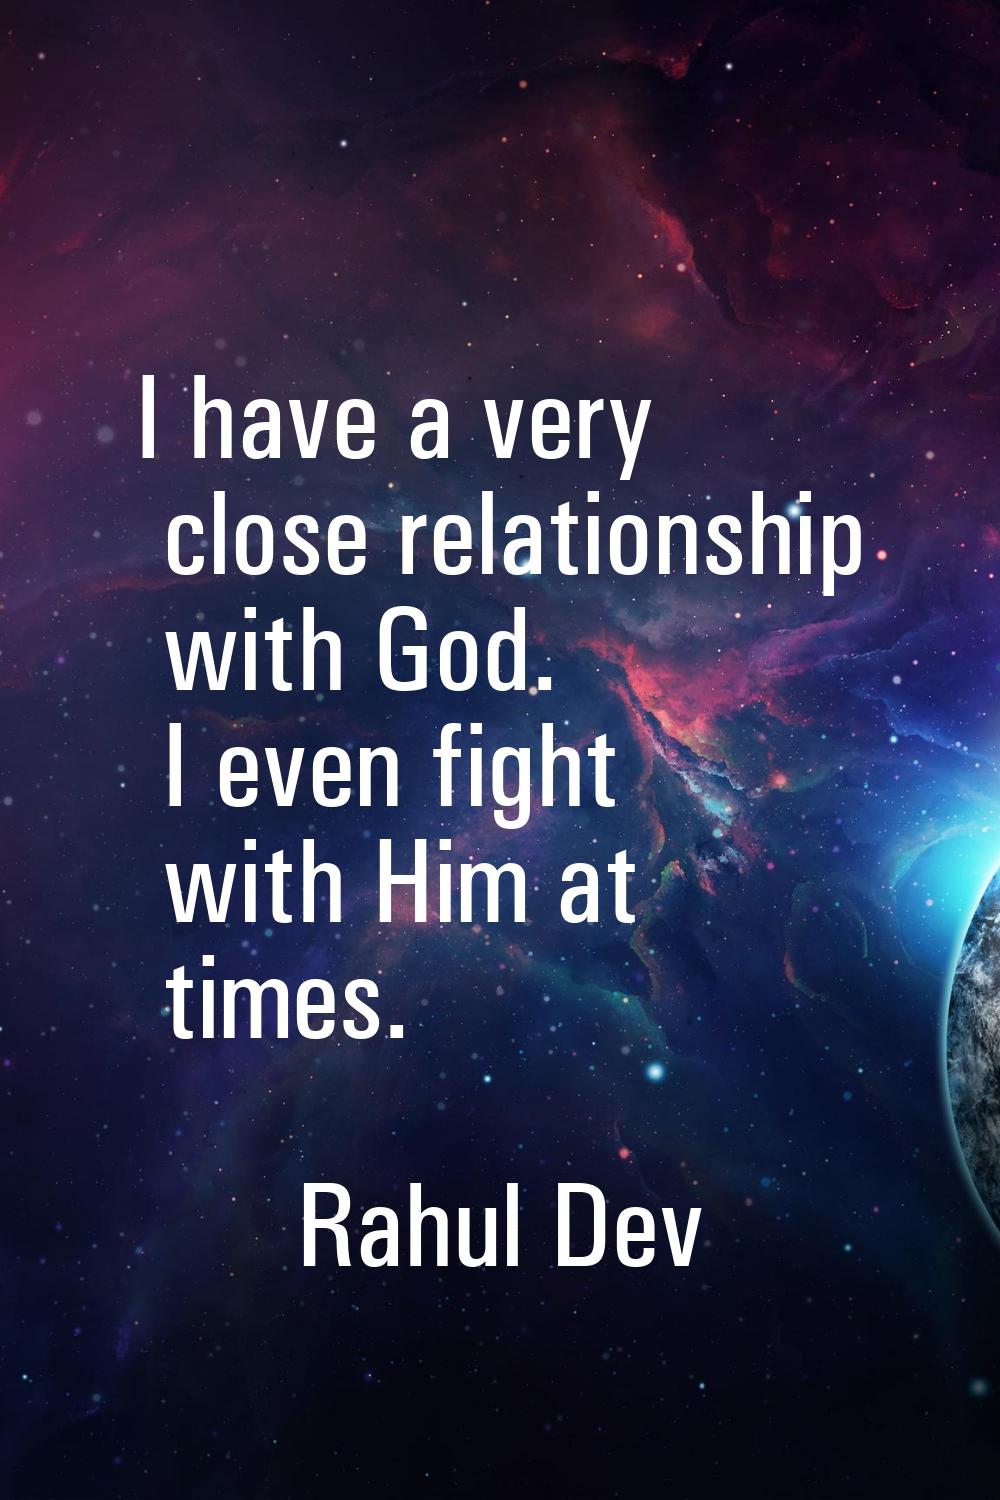 I have a very close relationship with God. I even fight with Him at times.